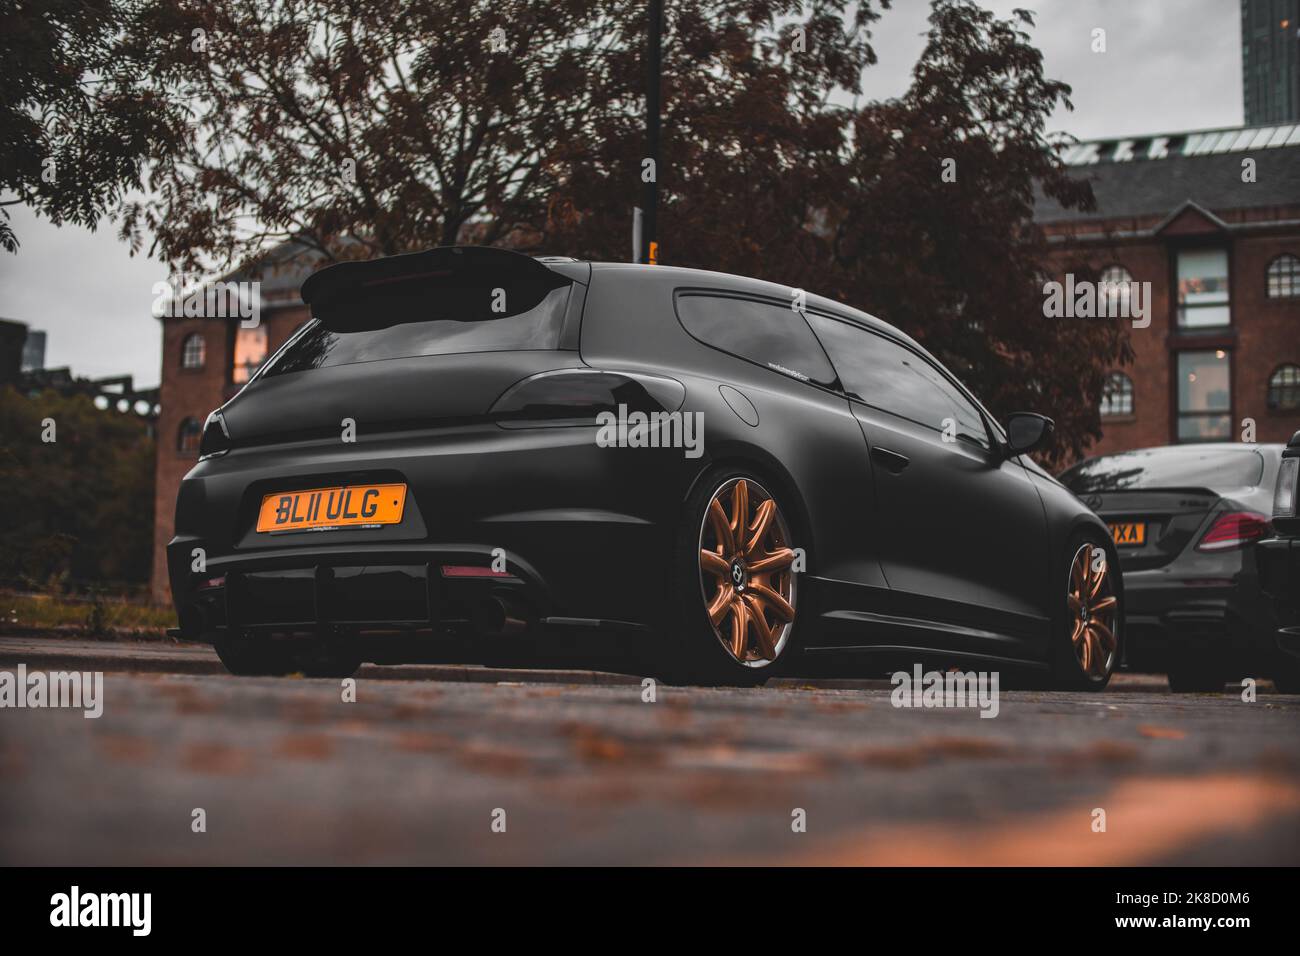 A Modified Satin Black Wrapped 2011 Volkswagen Scirocco R Hatchback With Gold Aftermarket Bentley Alloy Wheels With Aftermarket Bodykit And Air Suspen Stock Photo